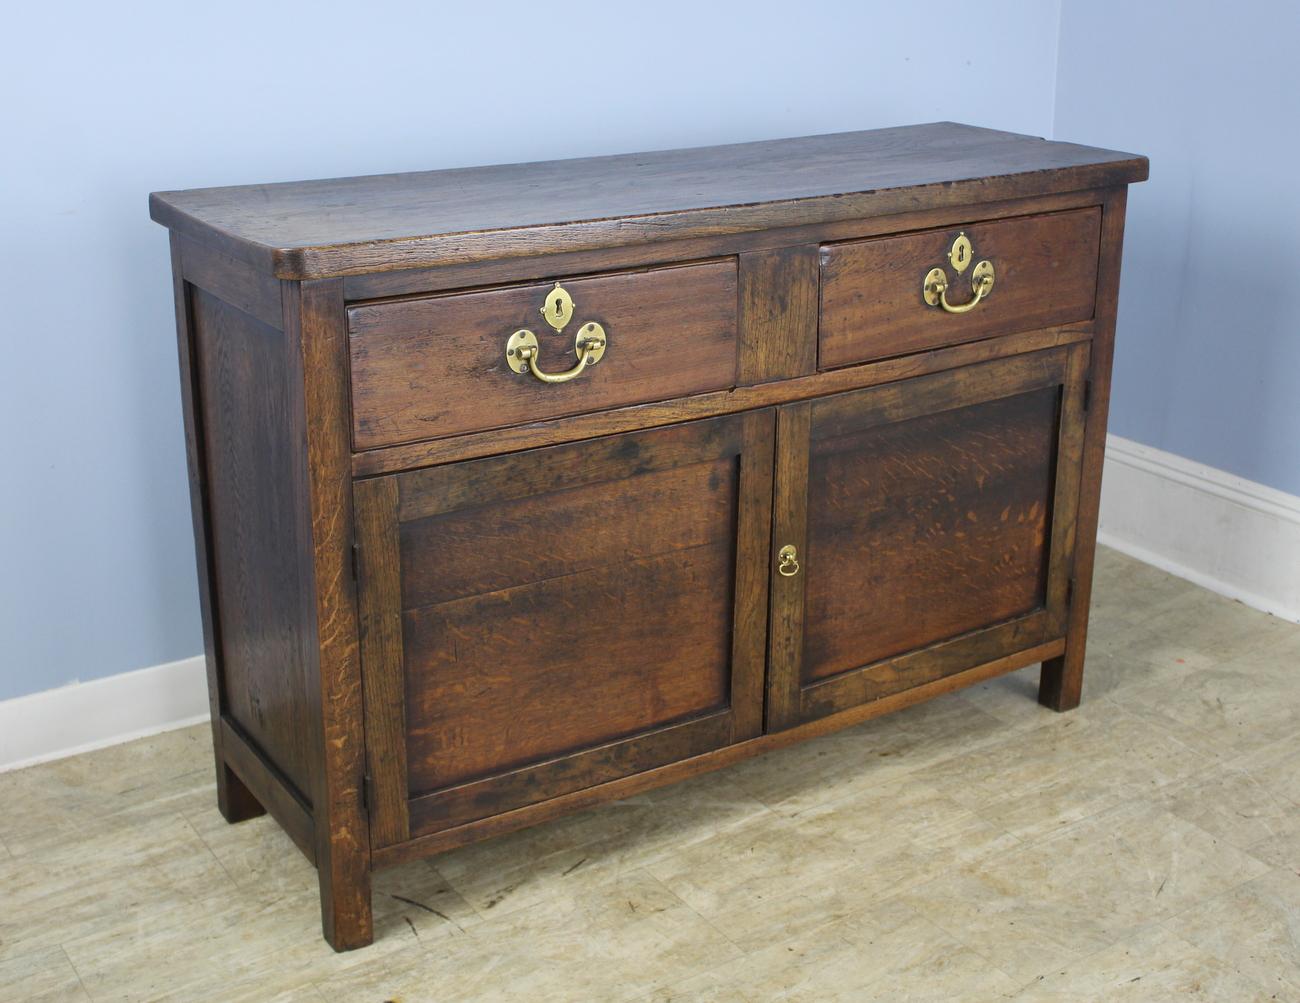 Although it's original use may have been as a chopping block, this cabinet makes a lovely server or console table. Though the eye catching brasses are antique, they may not be original to the piece. Good roomy cupboard below with a handsome